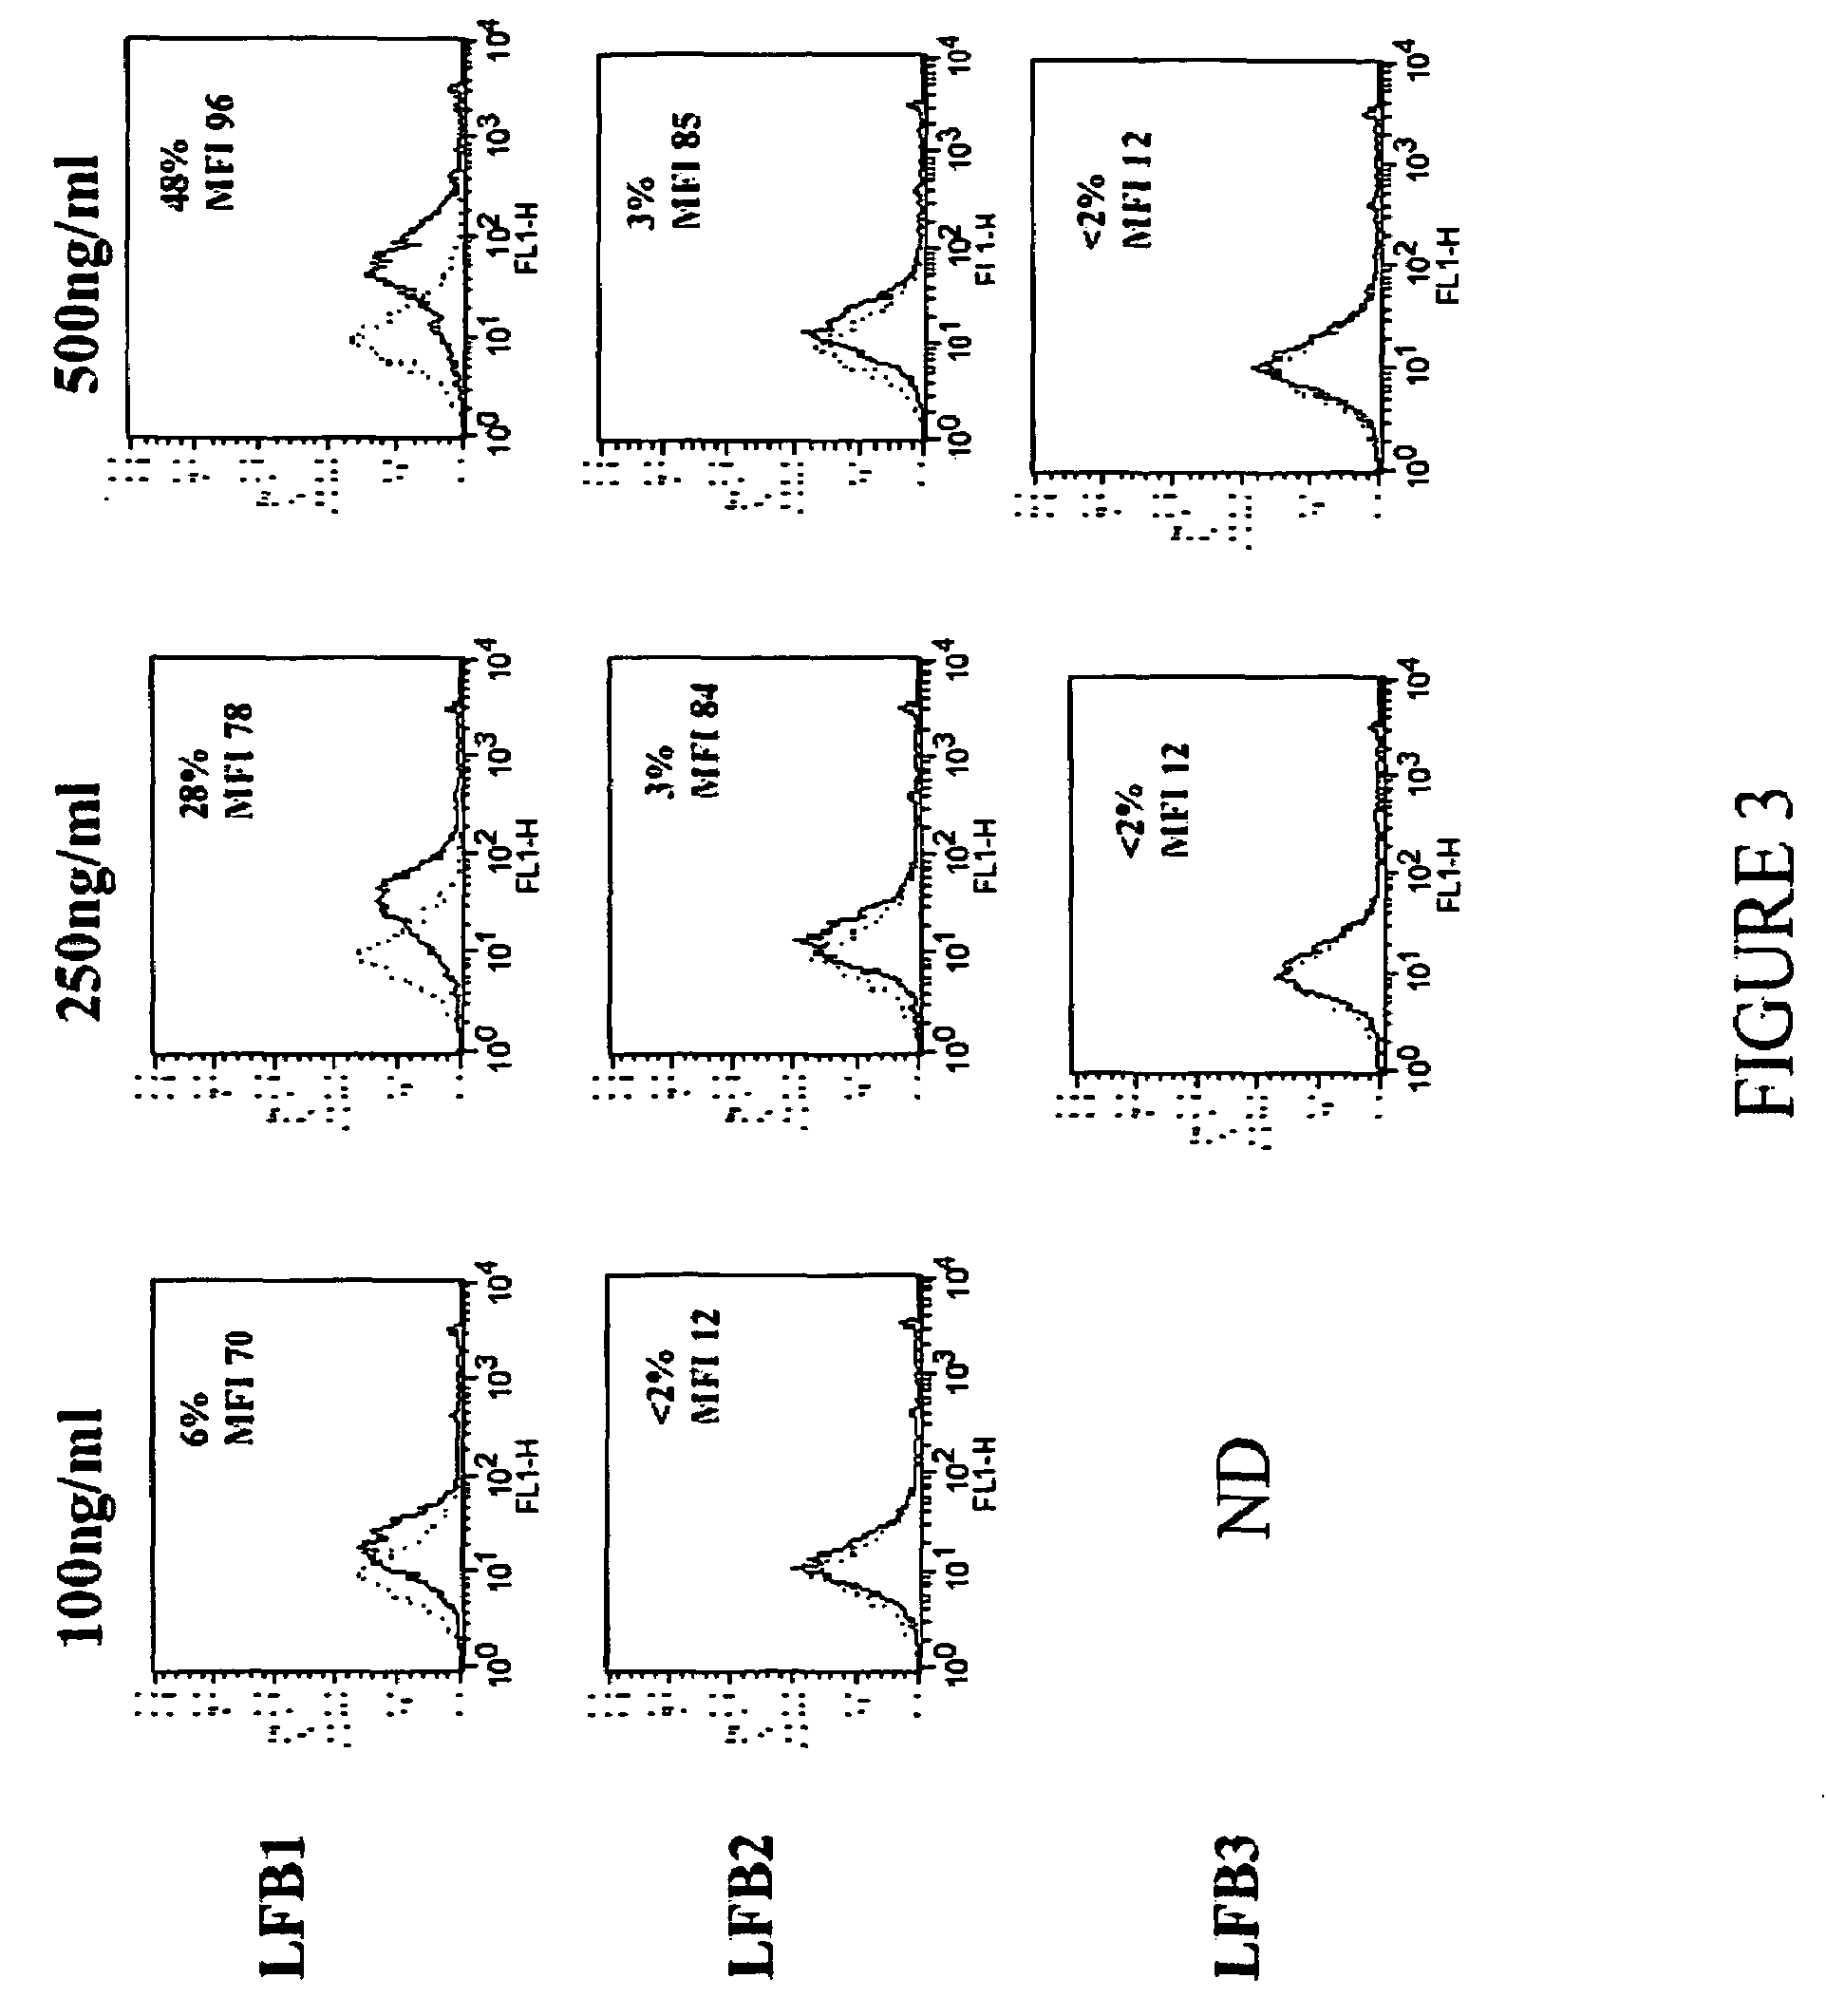 Preparation of human, humanized or chimaeric antibodies or polypeptides having different binding profiles to Fcgamma receptors